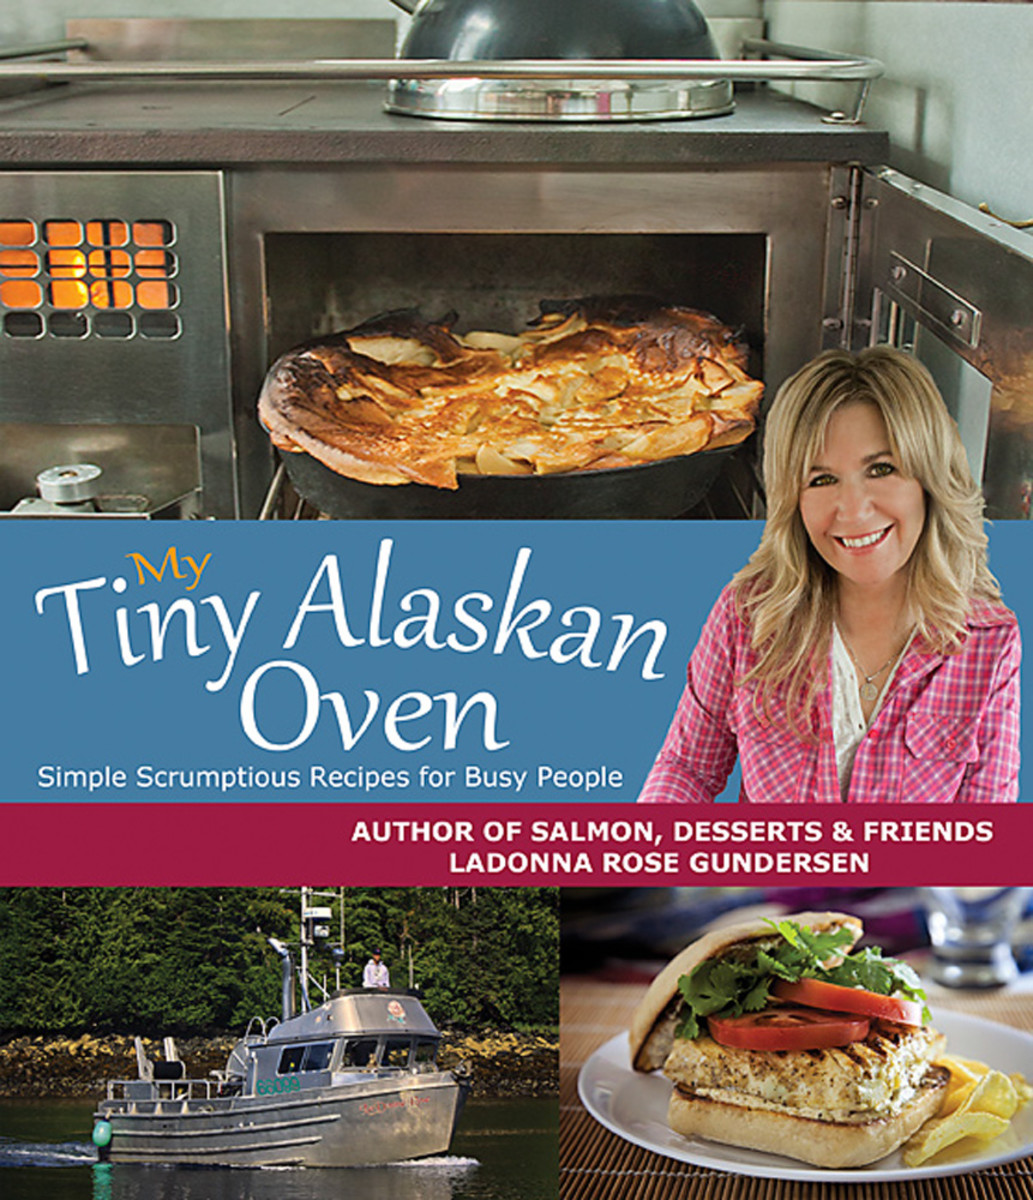 As seen in LaDonna Rose Gundersen's best-selling cookbook, My Tiny Alaskan Oven, available on Amazon and select bookstores.  